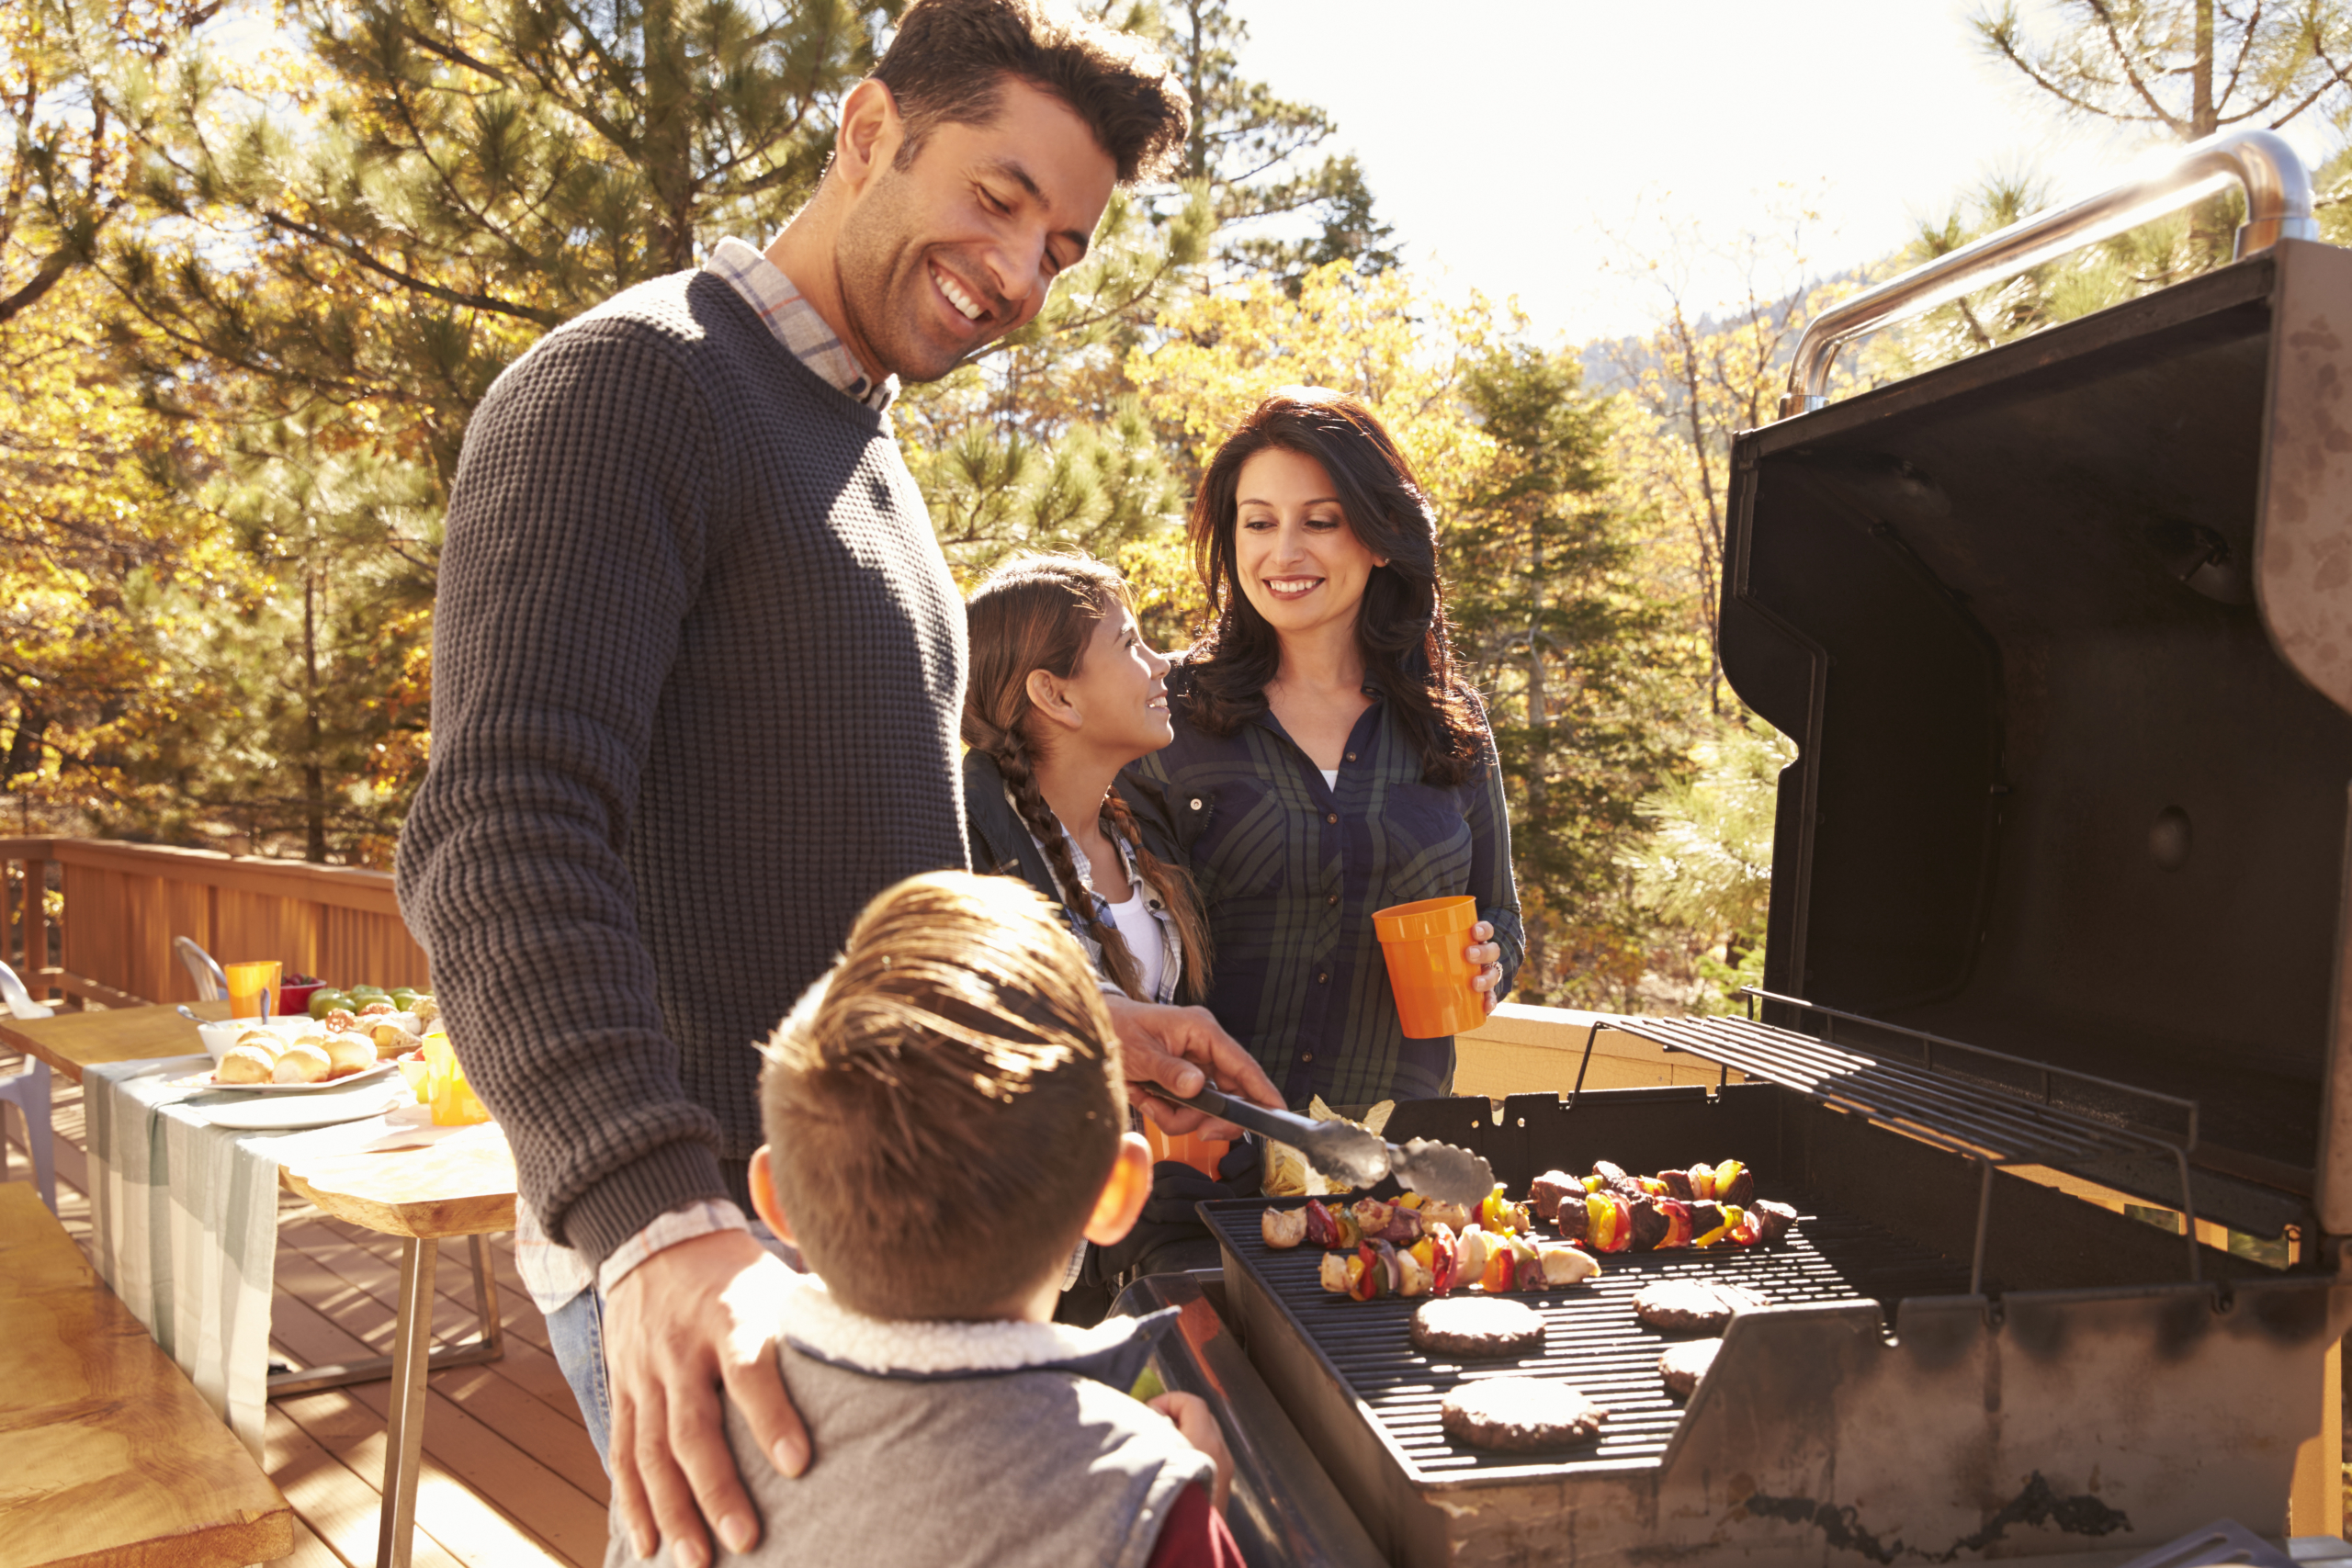 A family cooks on a grill outside